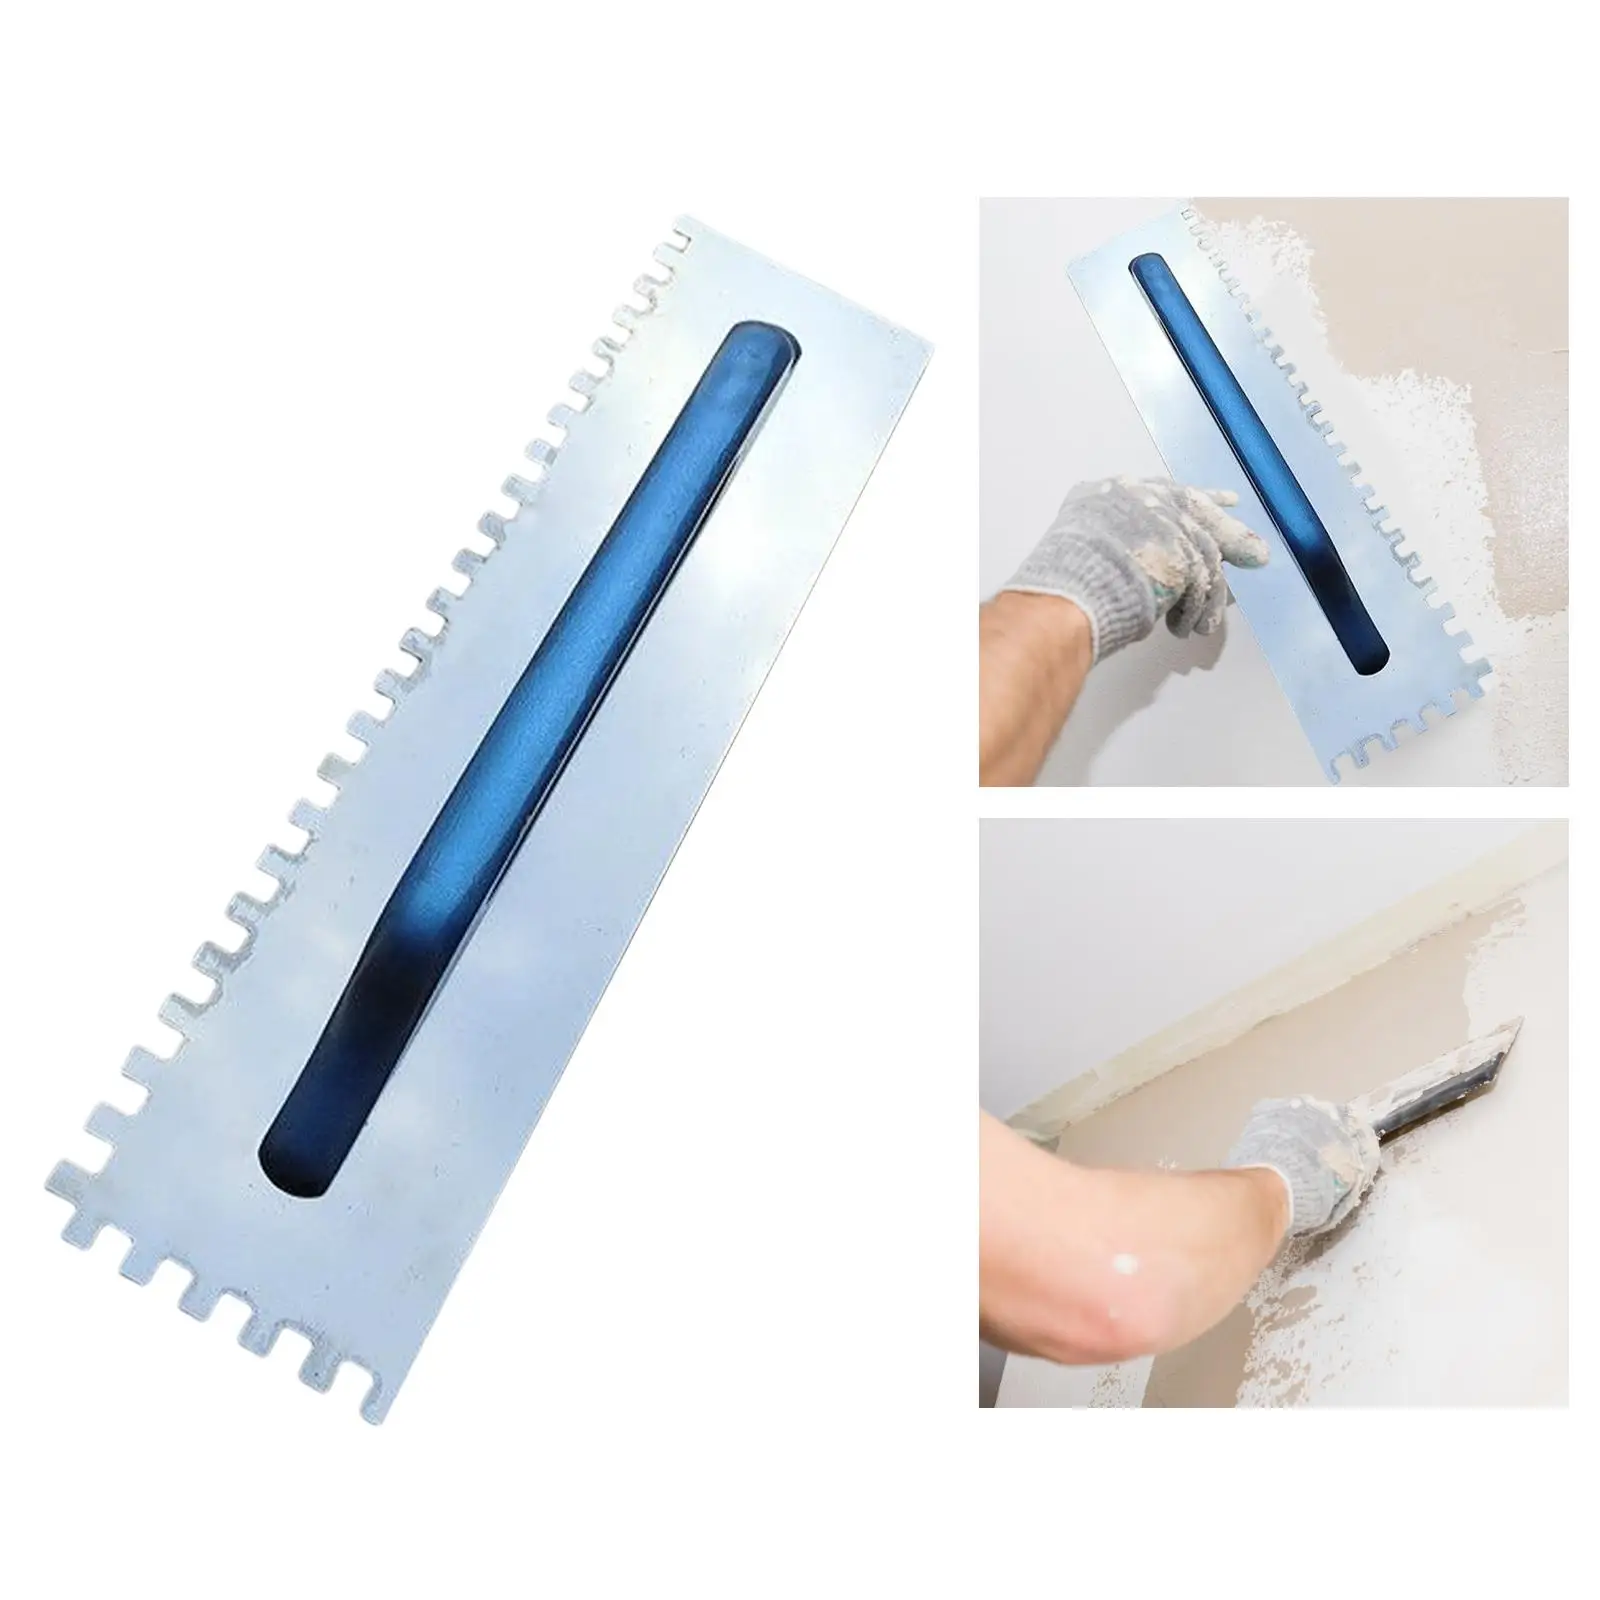 Drywall Smoothing Tool Plastering Skimming Trowel Tile Construction Tool